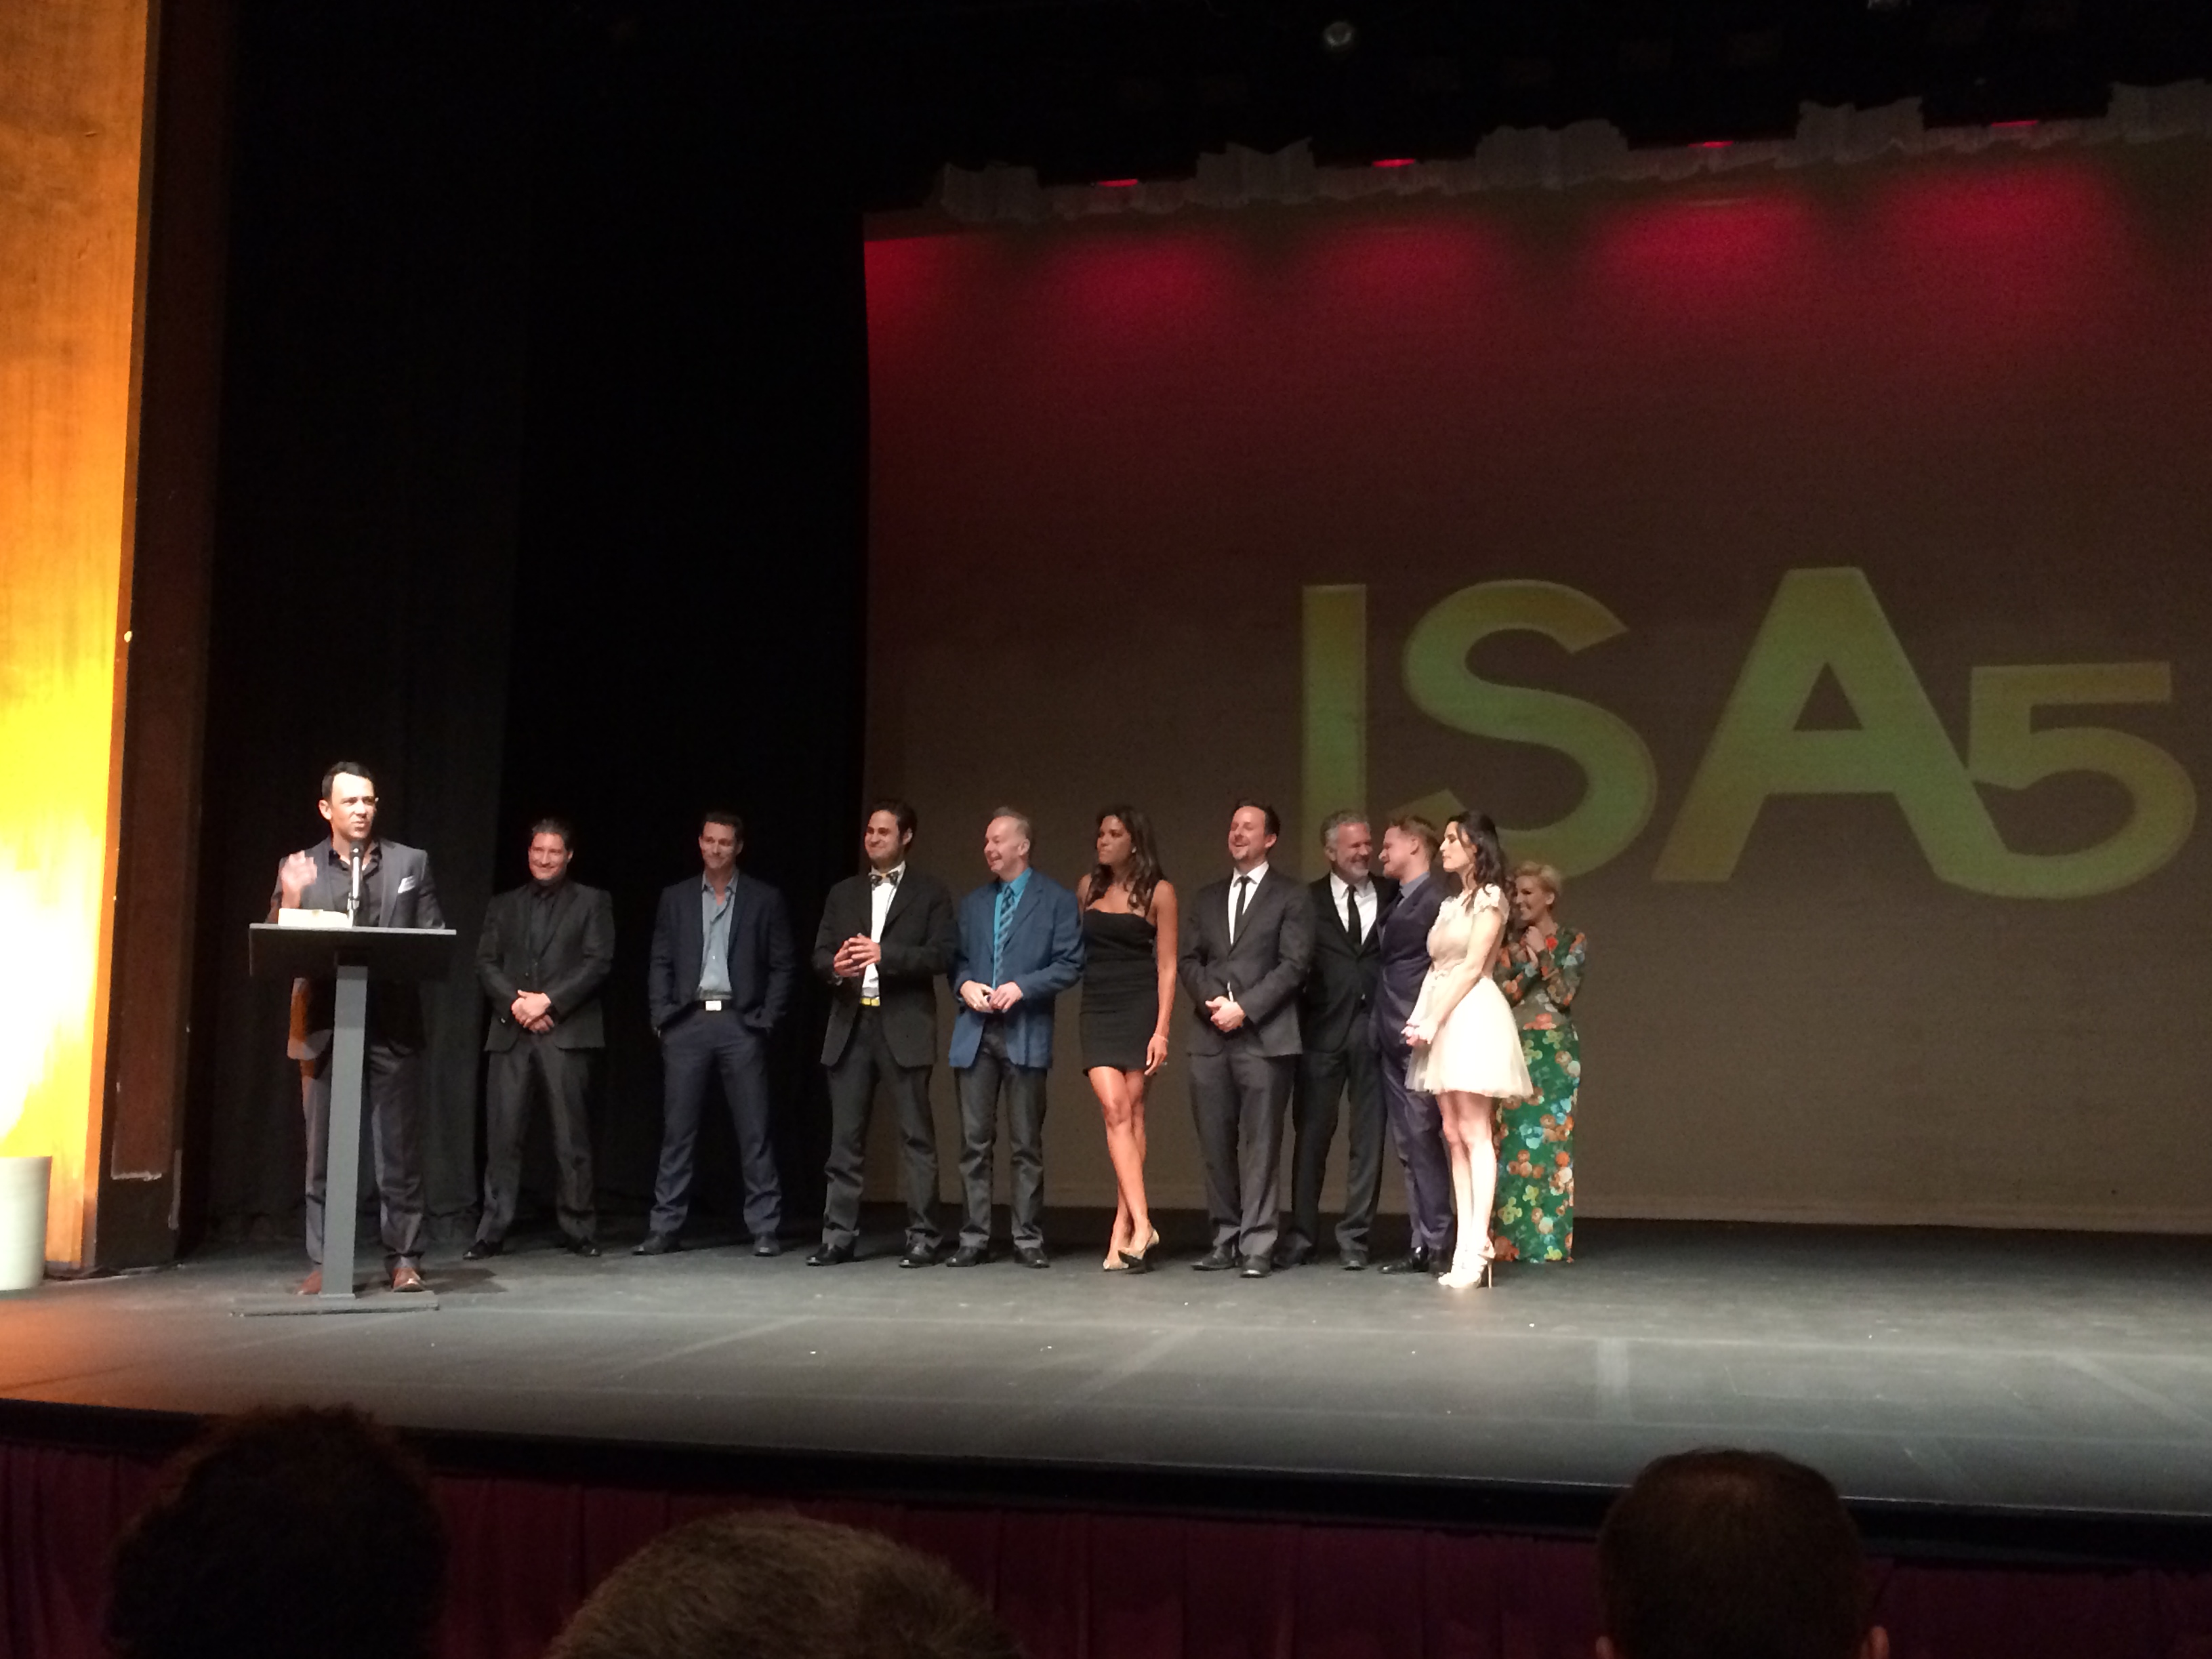 Cast of Hustling receives the ISA award for Best Dramatic Series